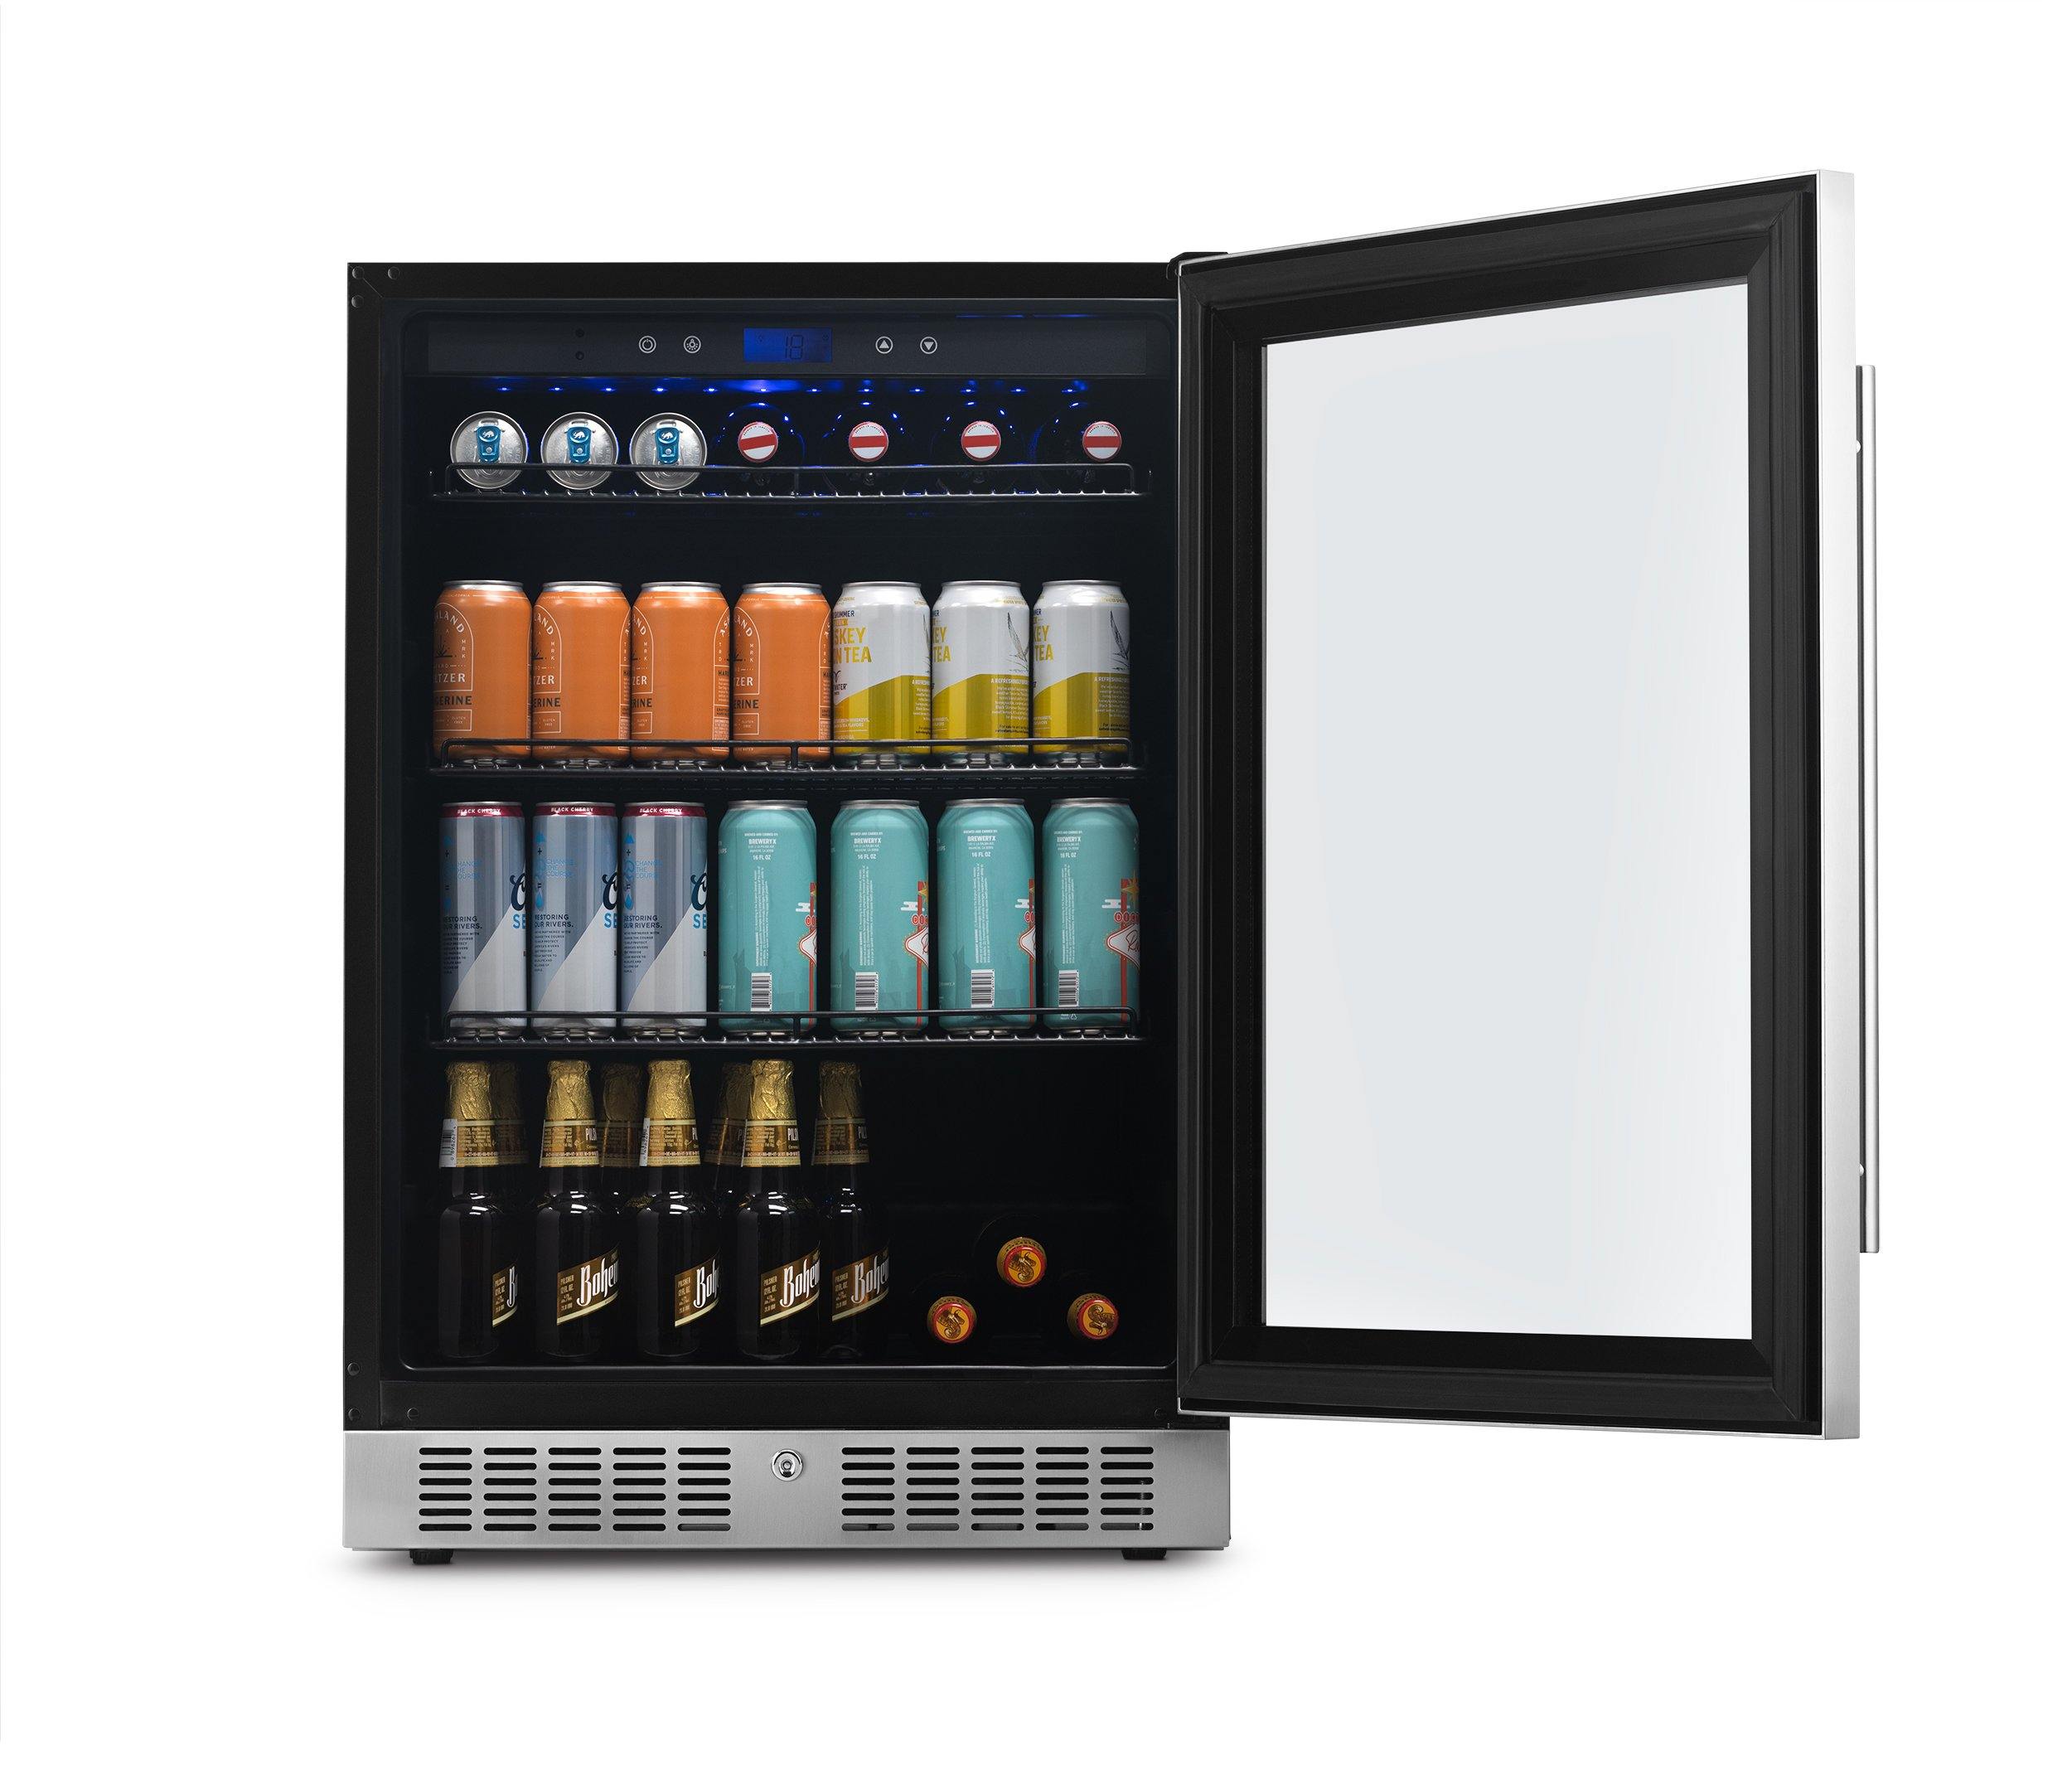 Newair - 24” 224-Can Built-in Premium Beverage Center w/ Color Changing LED Lights (NBC224SS00)